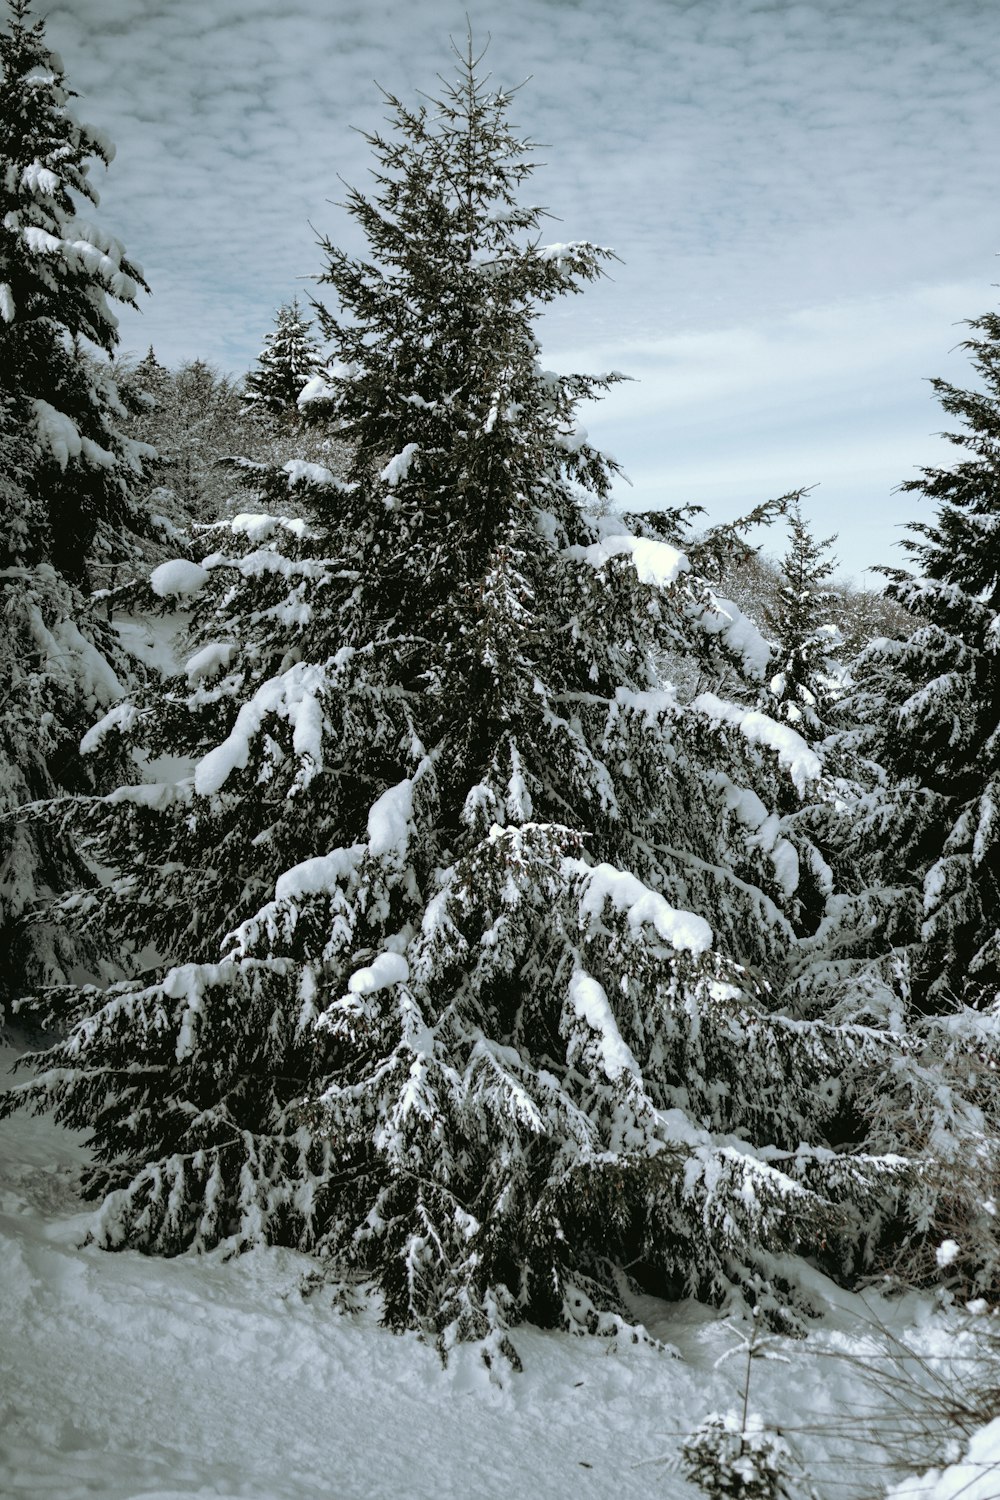 a person on skis in the snow near some trees